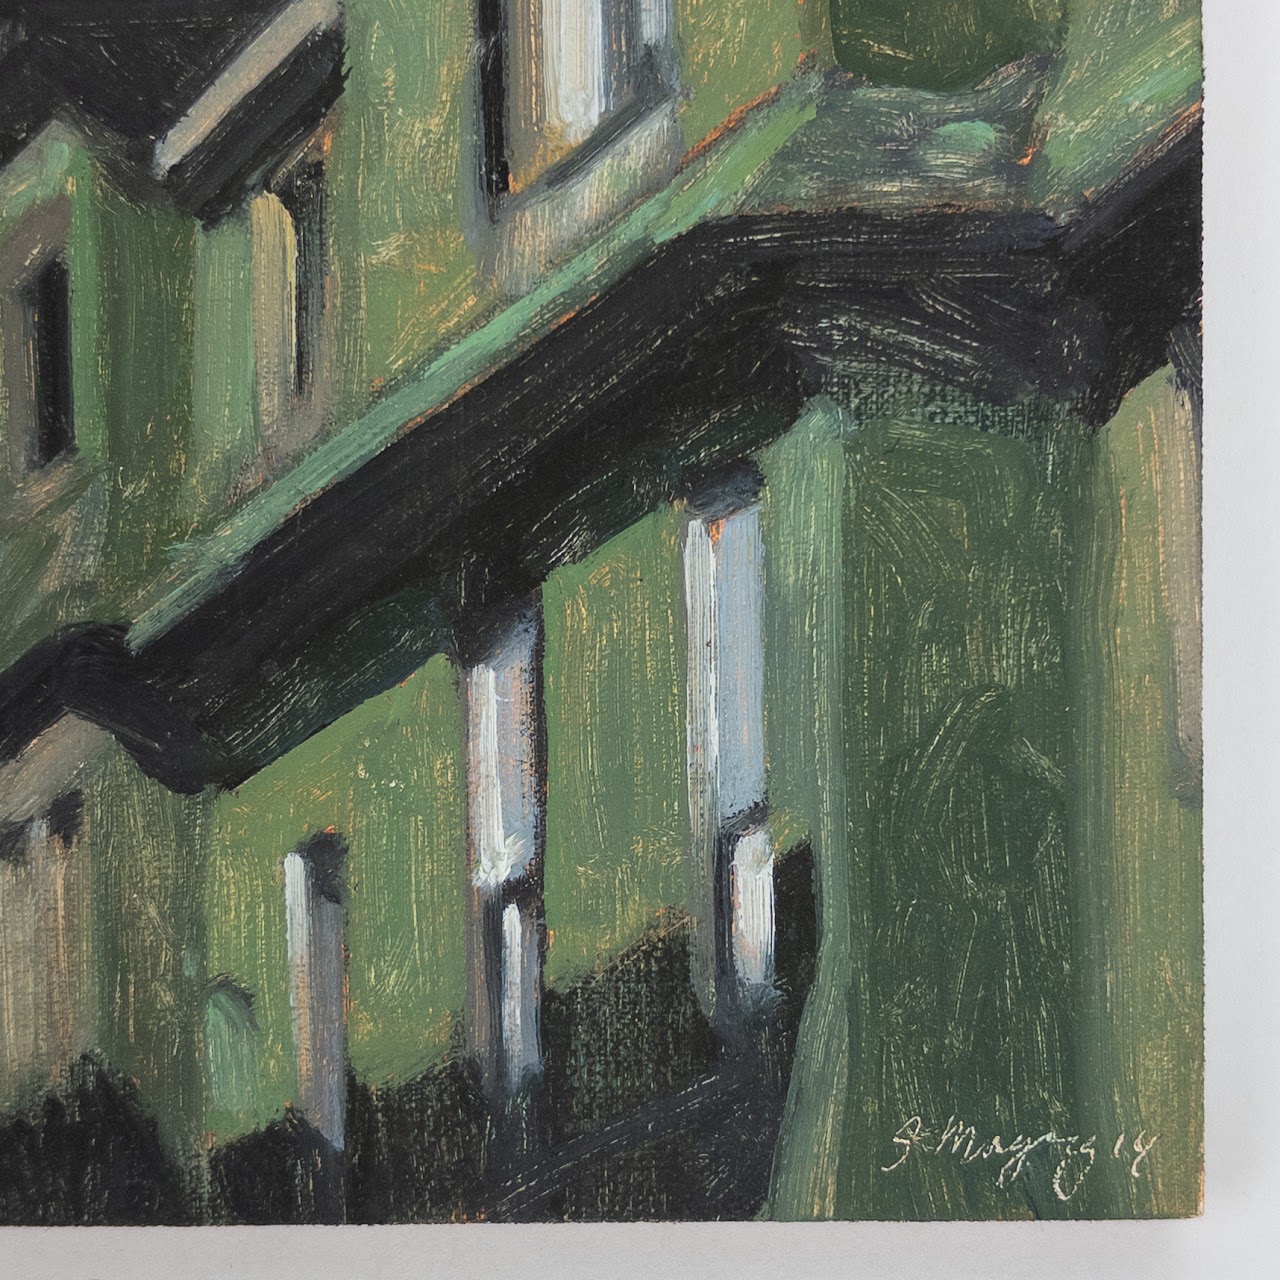 Stephen Magsig "The Green Roof" Small Painting